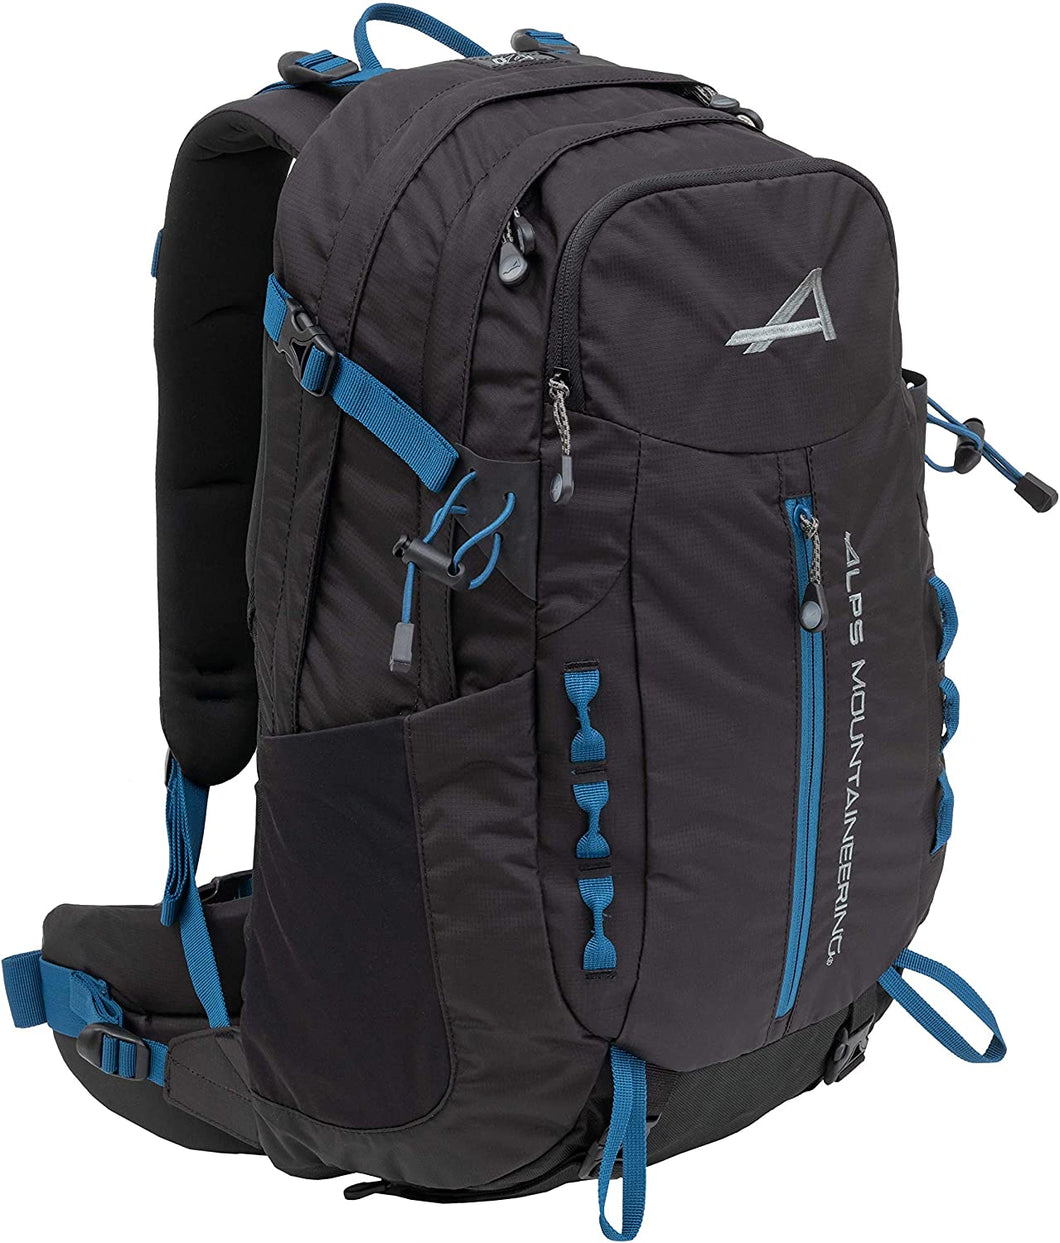 ALPS Mountaineering Solitude Day Backpack 24L, Black/Blue - AL6062051